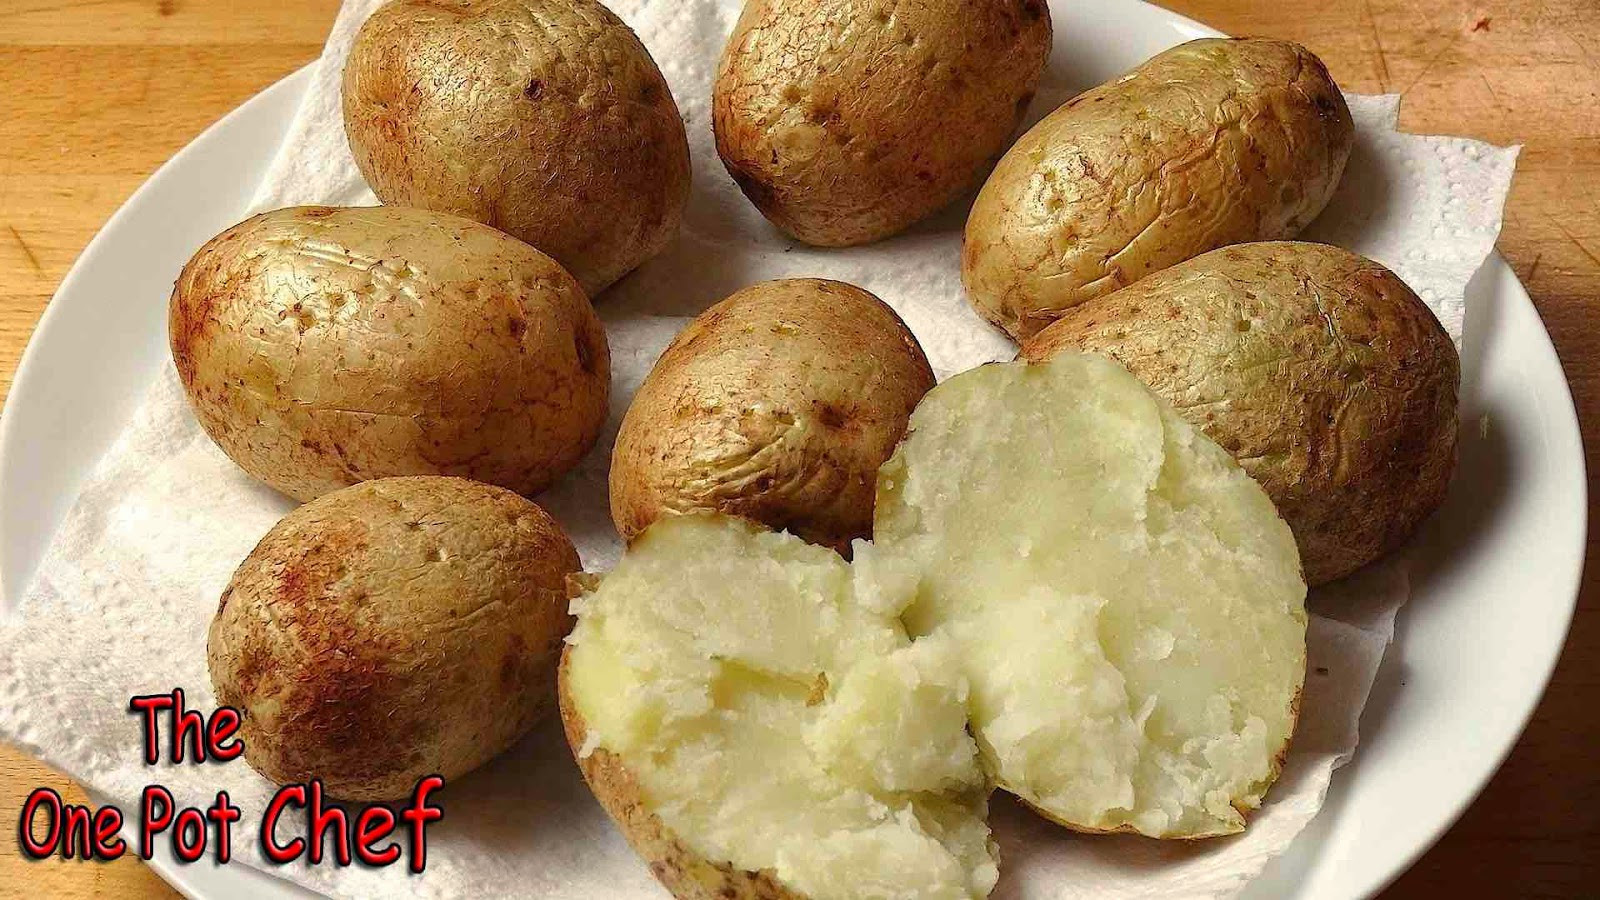 Microwaved Baked Potato
 The e Pot Chef Show Quick Tips Microwave Baked Potatoes